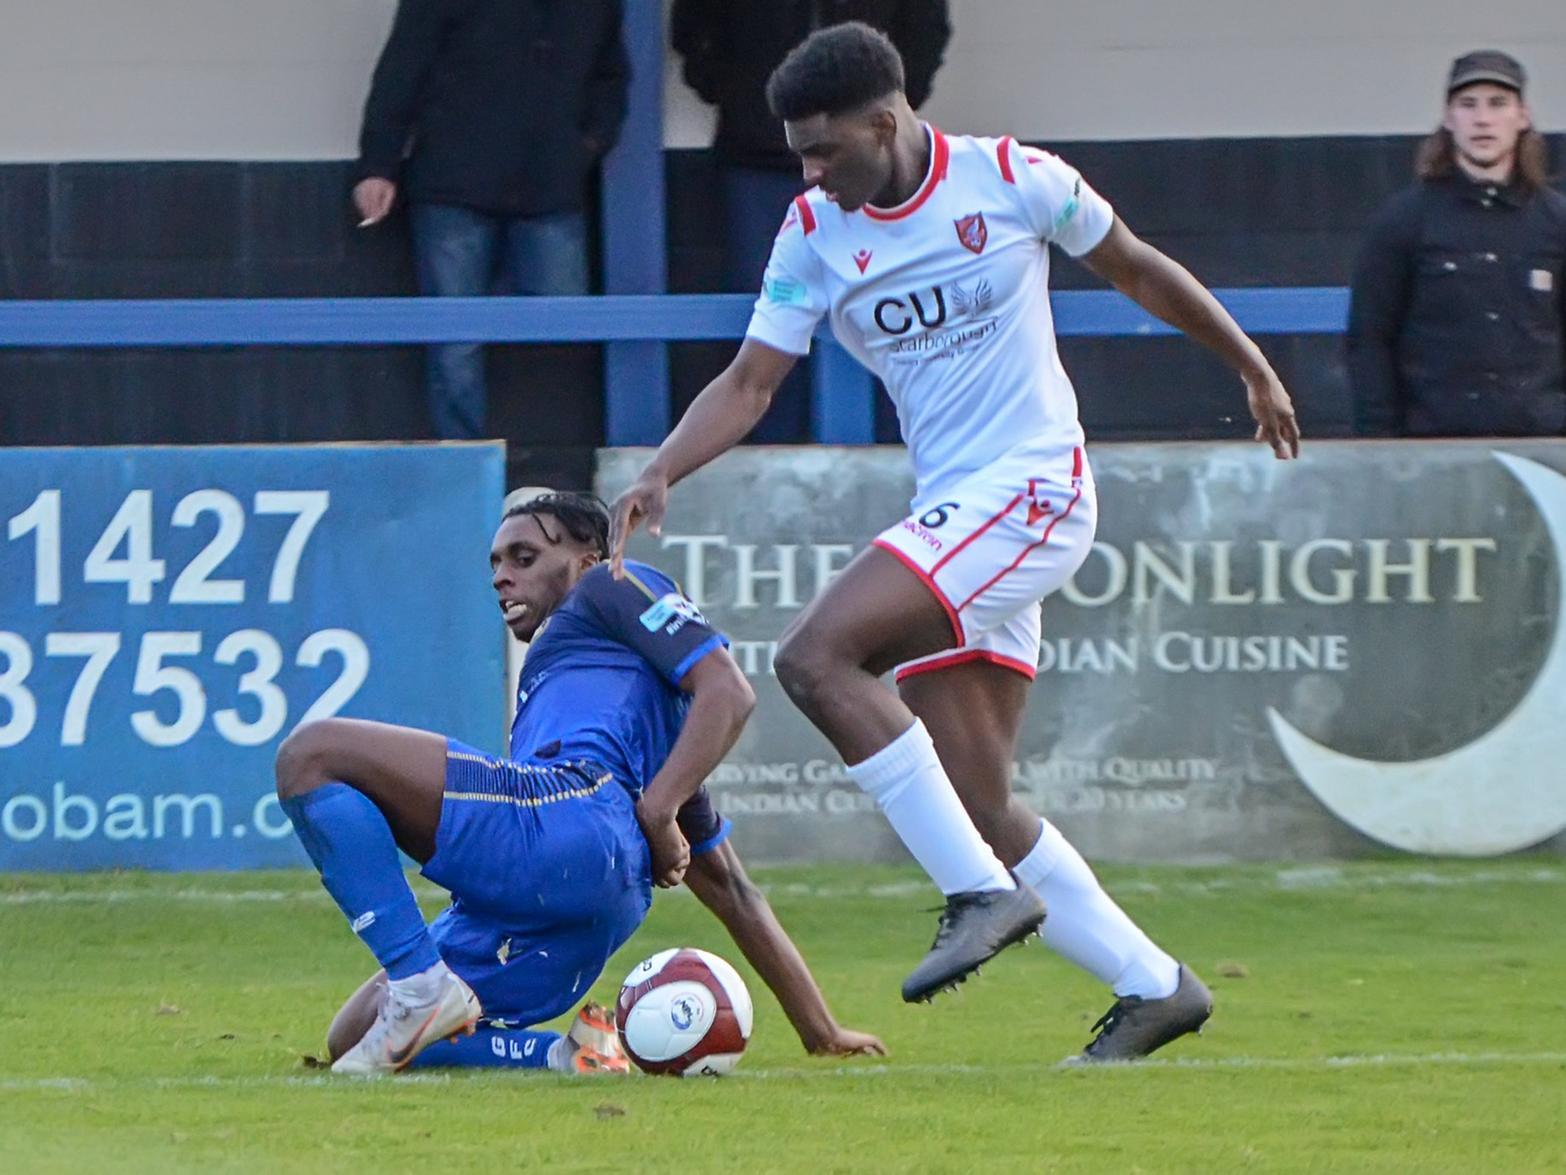 Gainsborough Trinity 2-3 Scarborough Athletic / BetVictor NPL / Pictures by John Rudkin